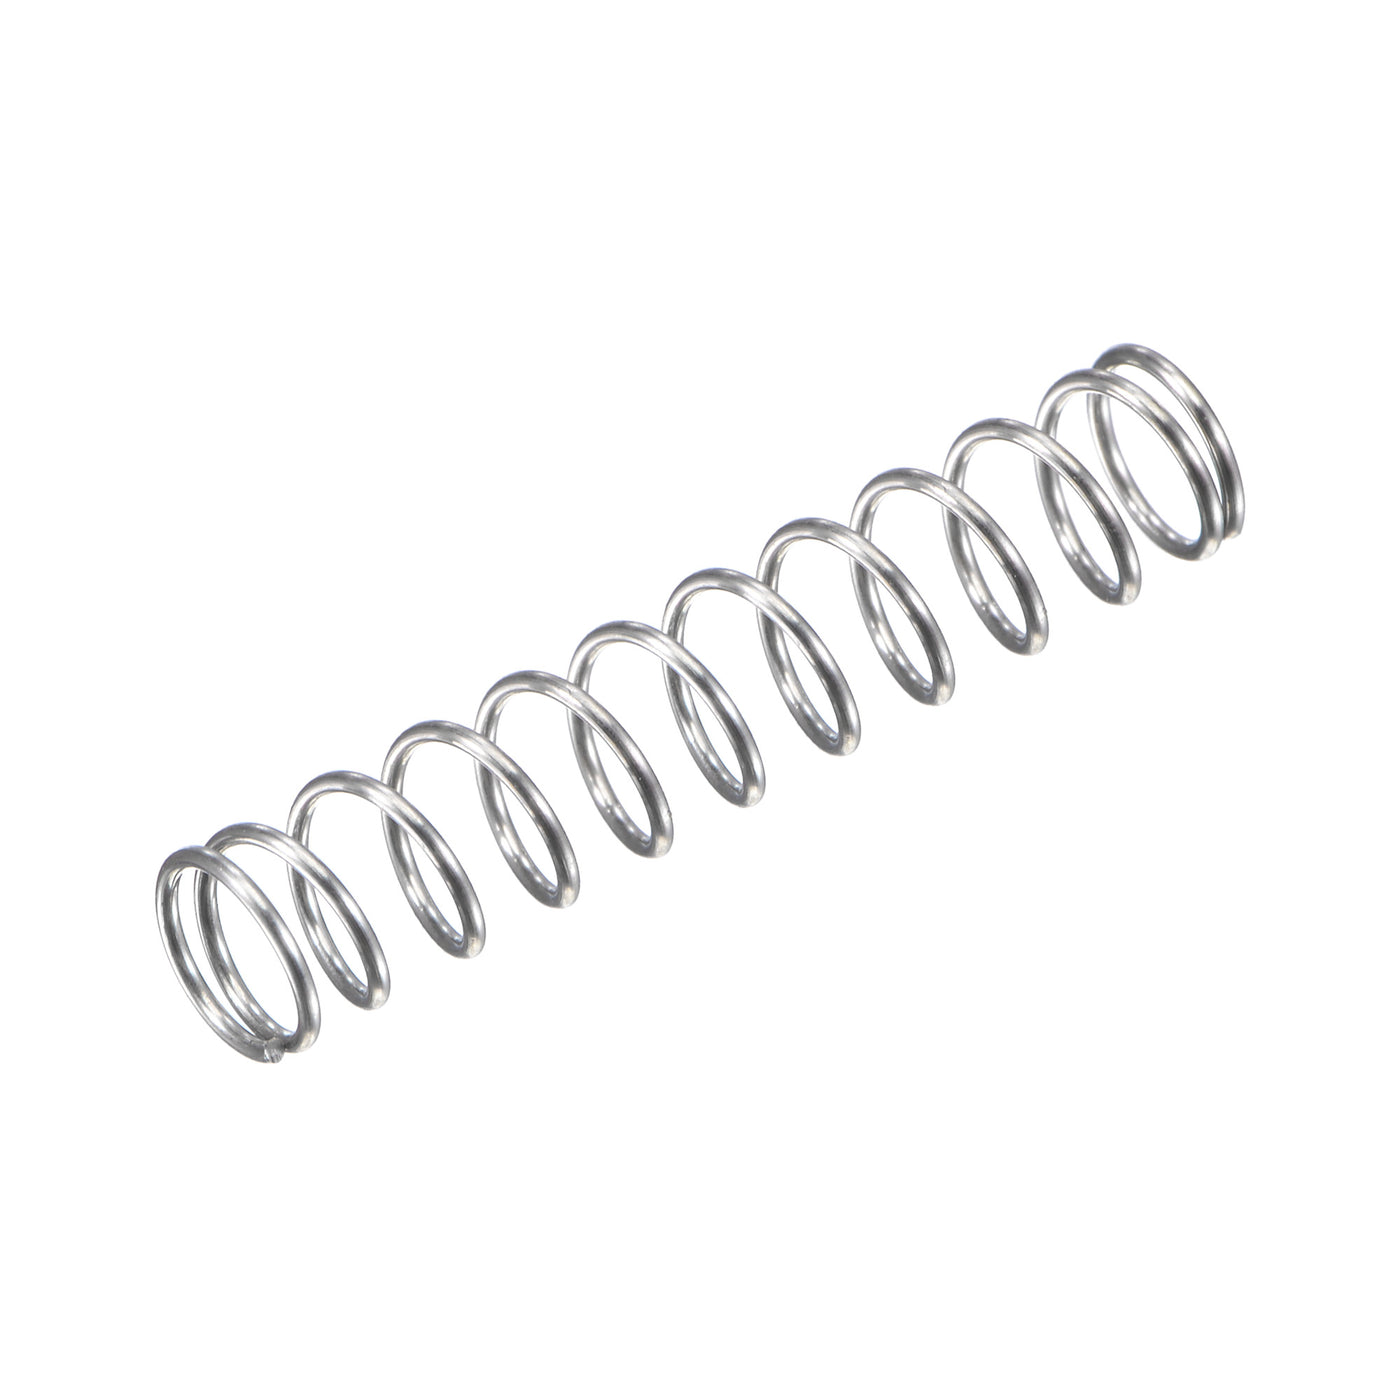 uxcell Uxcell 5mmx0.5mmx25mm 304 Stainless Steel Compression Spring 5.9N Load Capacity 20pcs